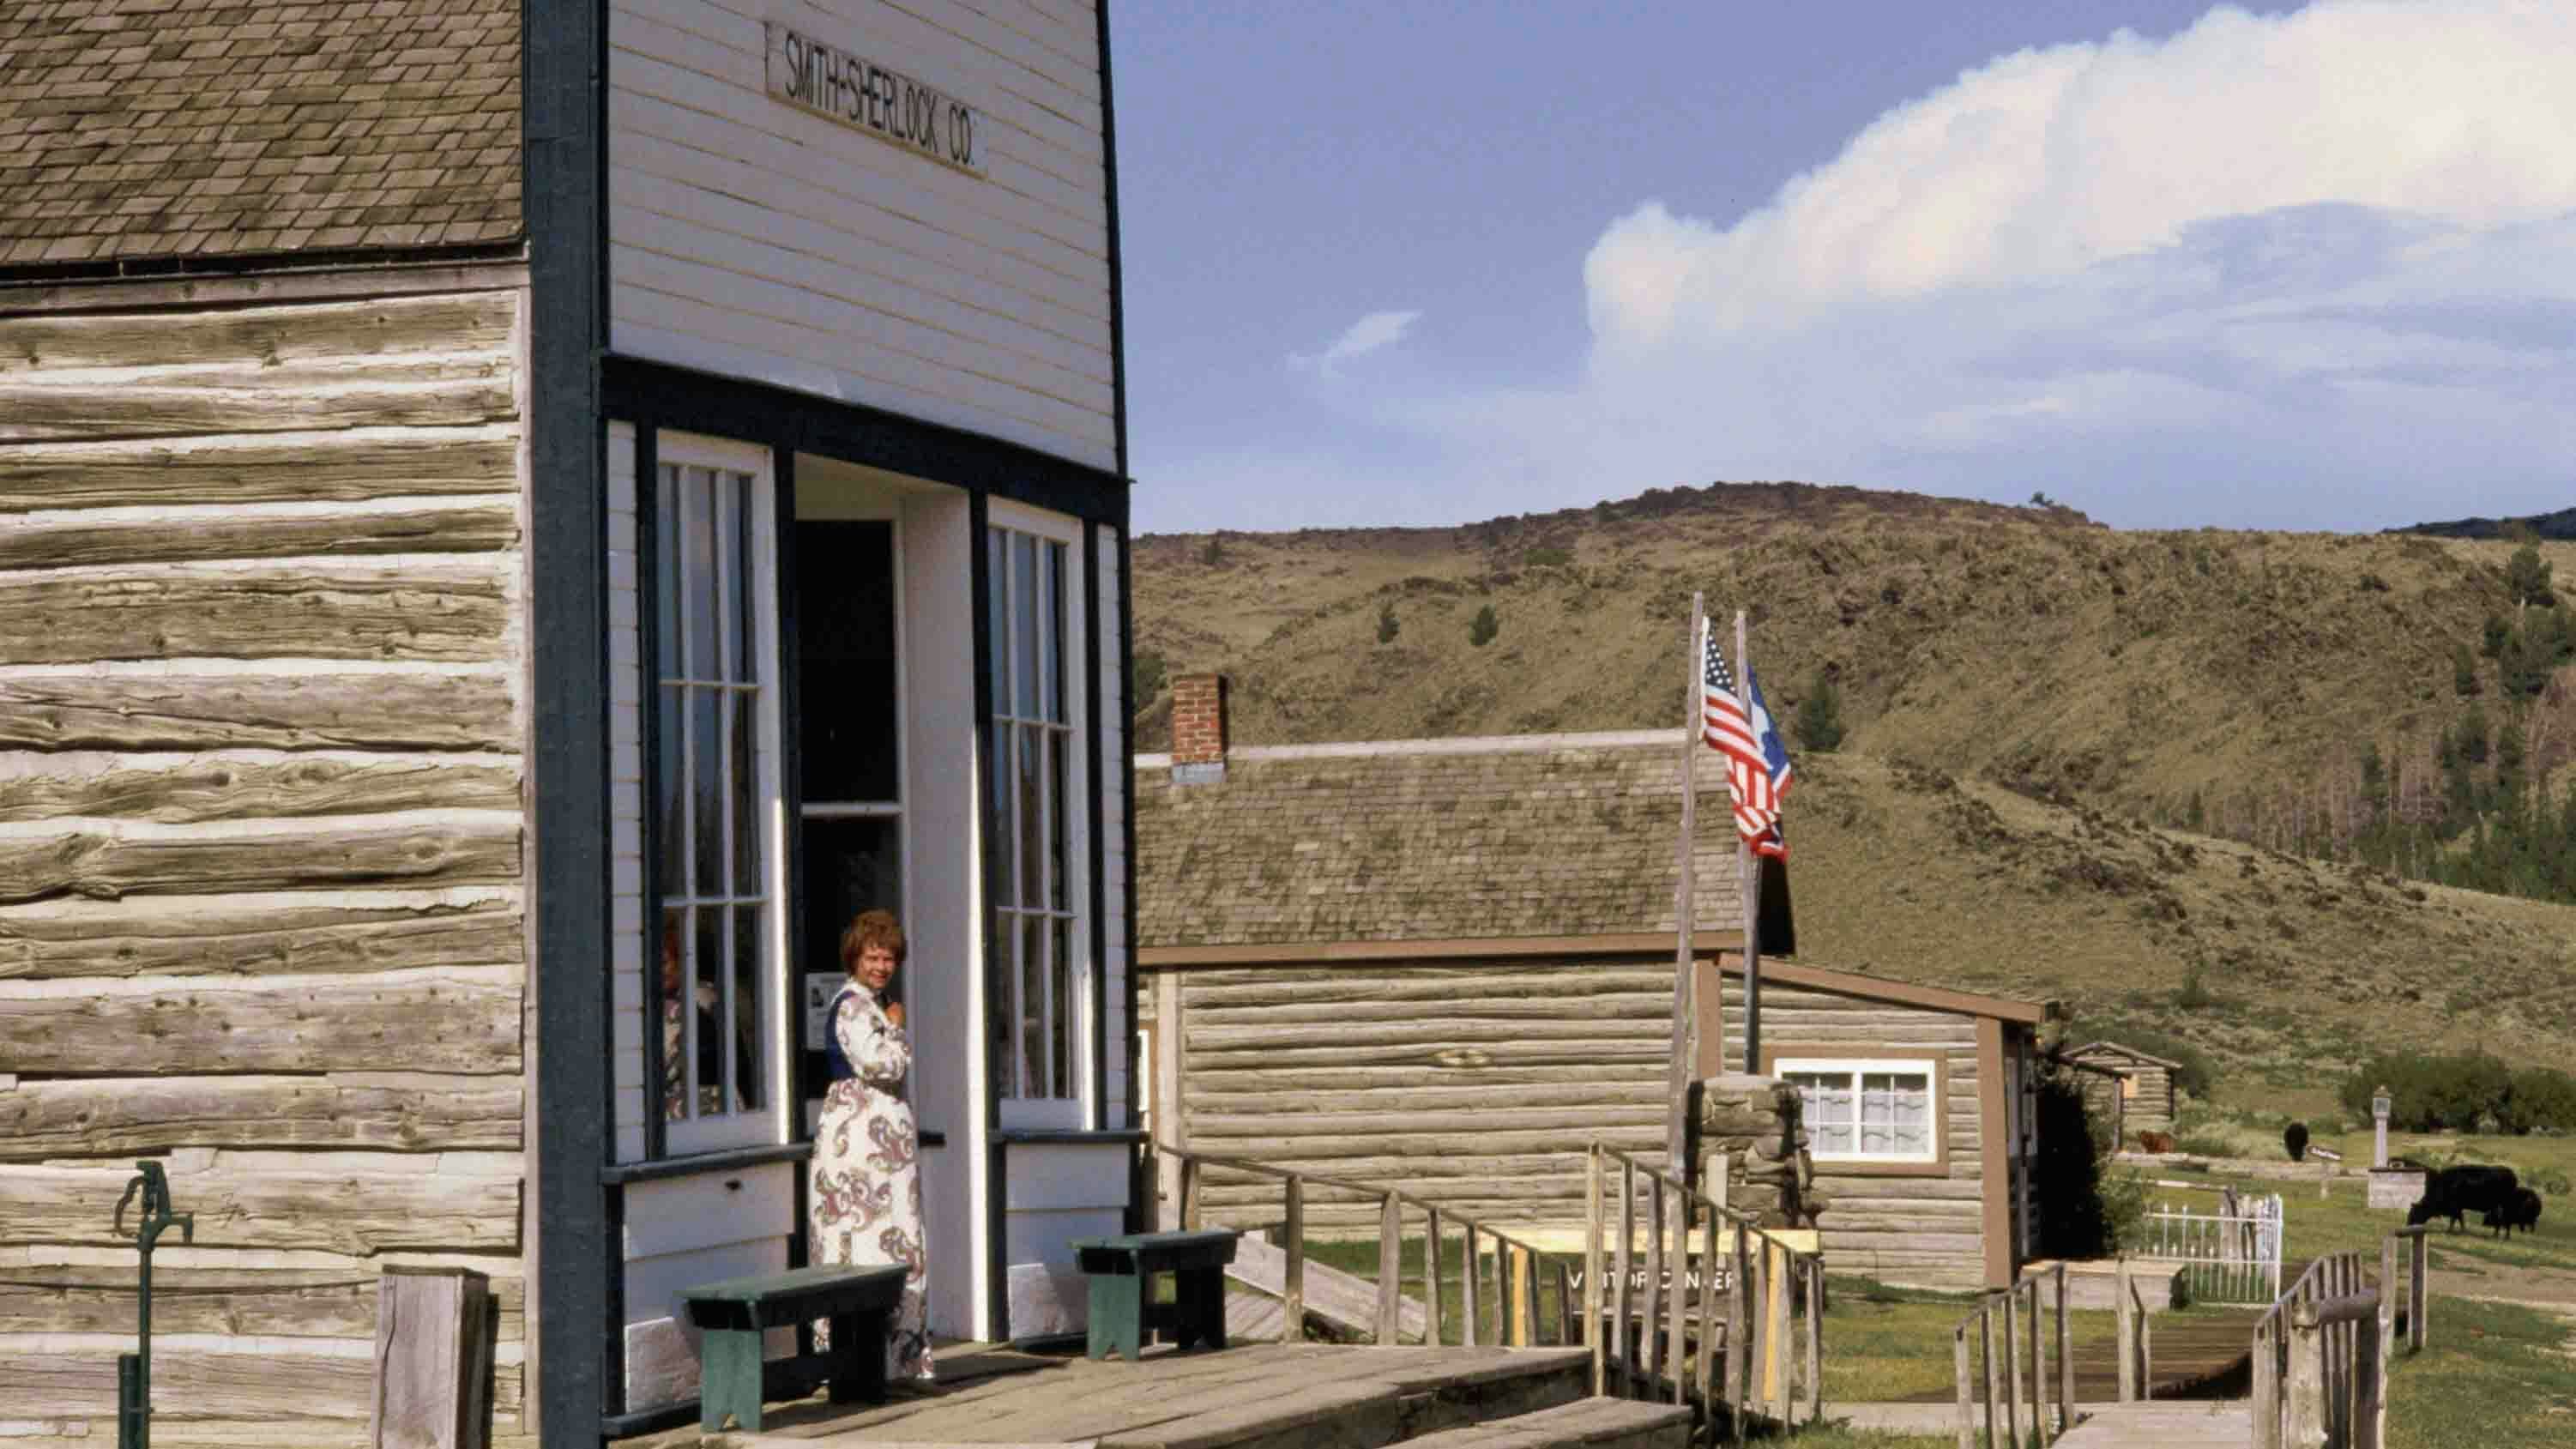 A general store stands much as it did at the time of pioneer migrations on the Oregon Trail in South Pass City, the last post on the Trail before it crossed into the Rockies. South Pass City, Wyoming.